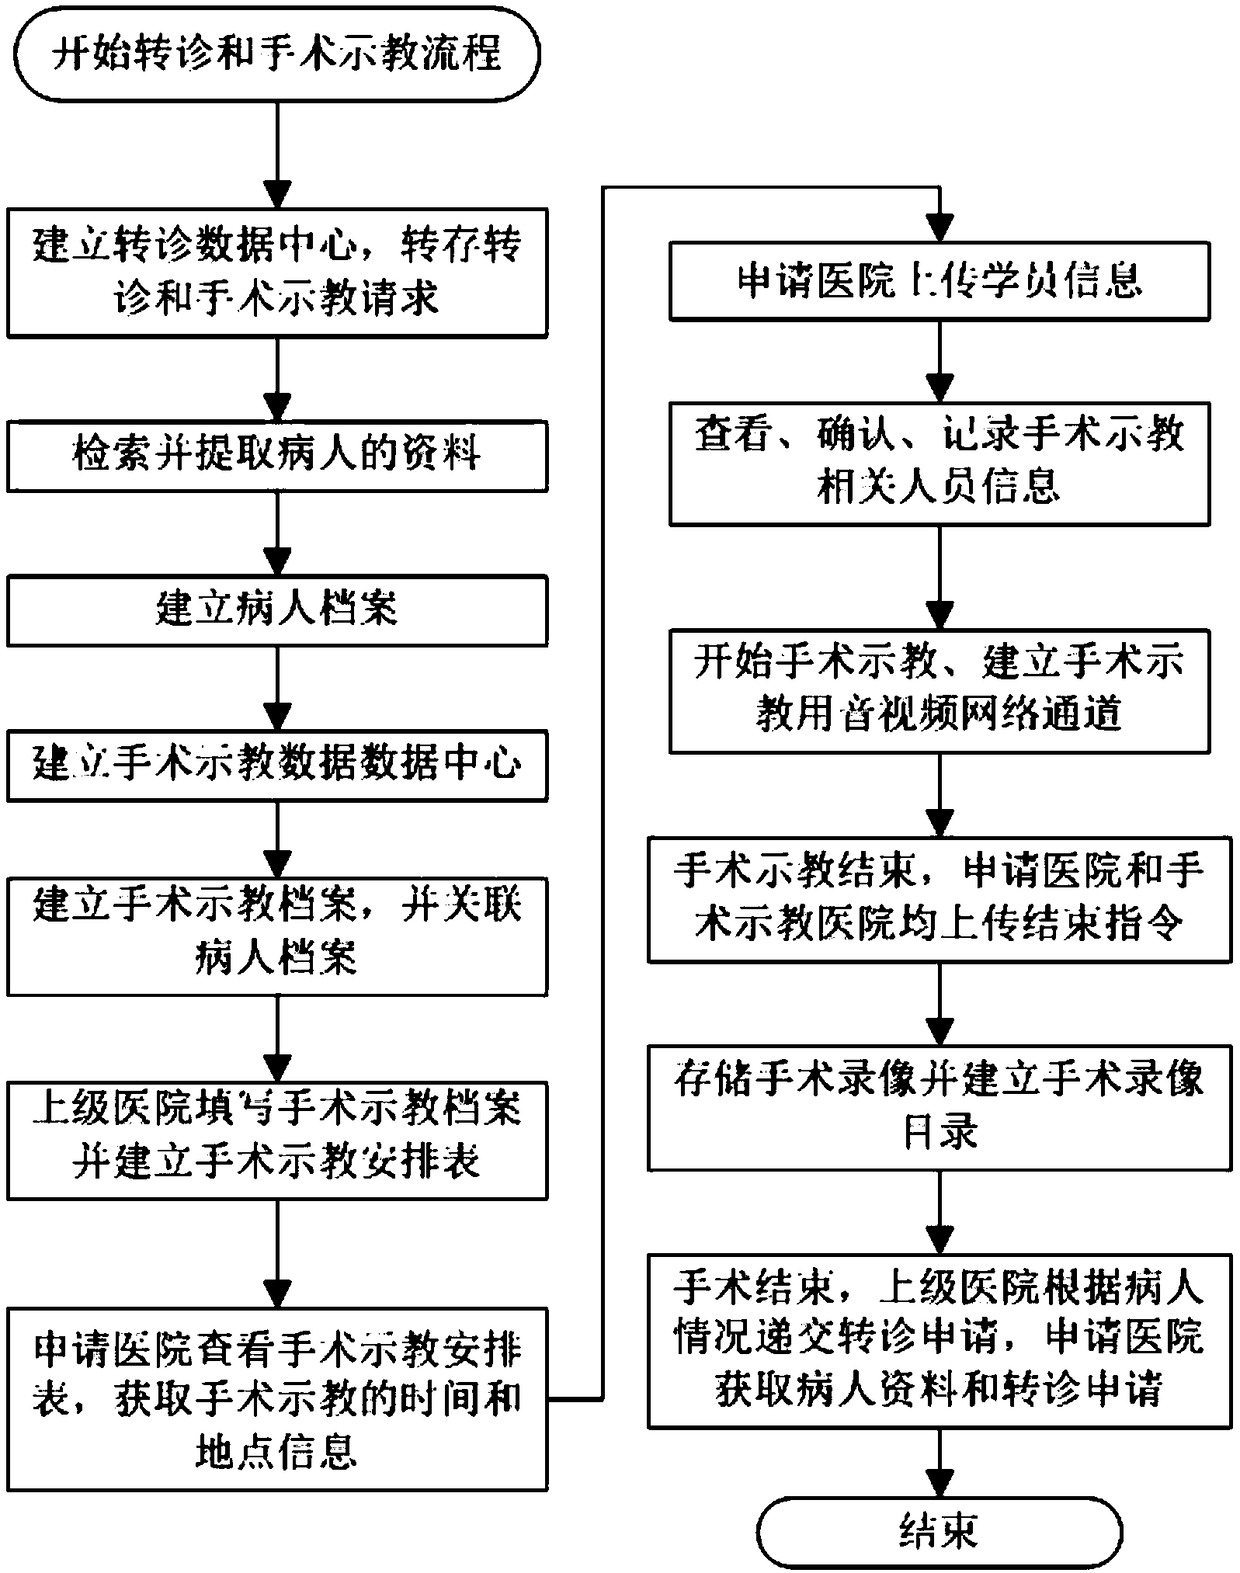 Operation teaching method based on teleconsultation and automatic referral